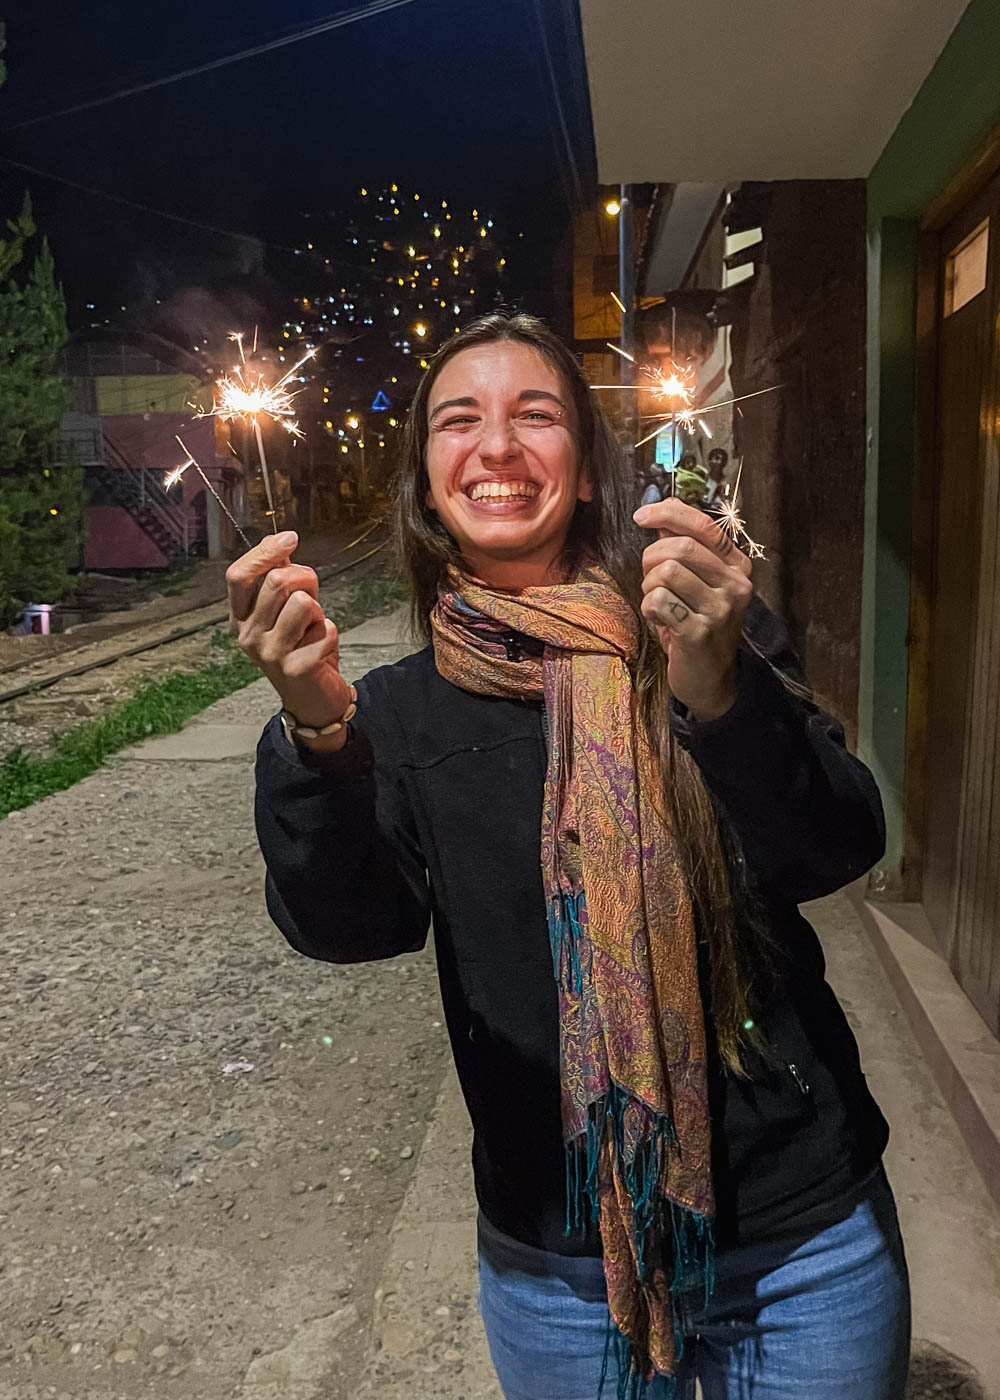 Sara smiling and holding up sparklers on Christmas Eve in Cusco.